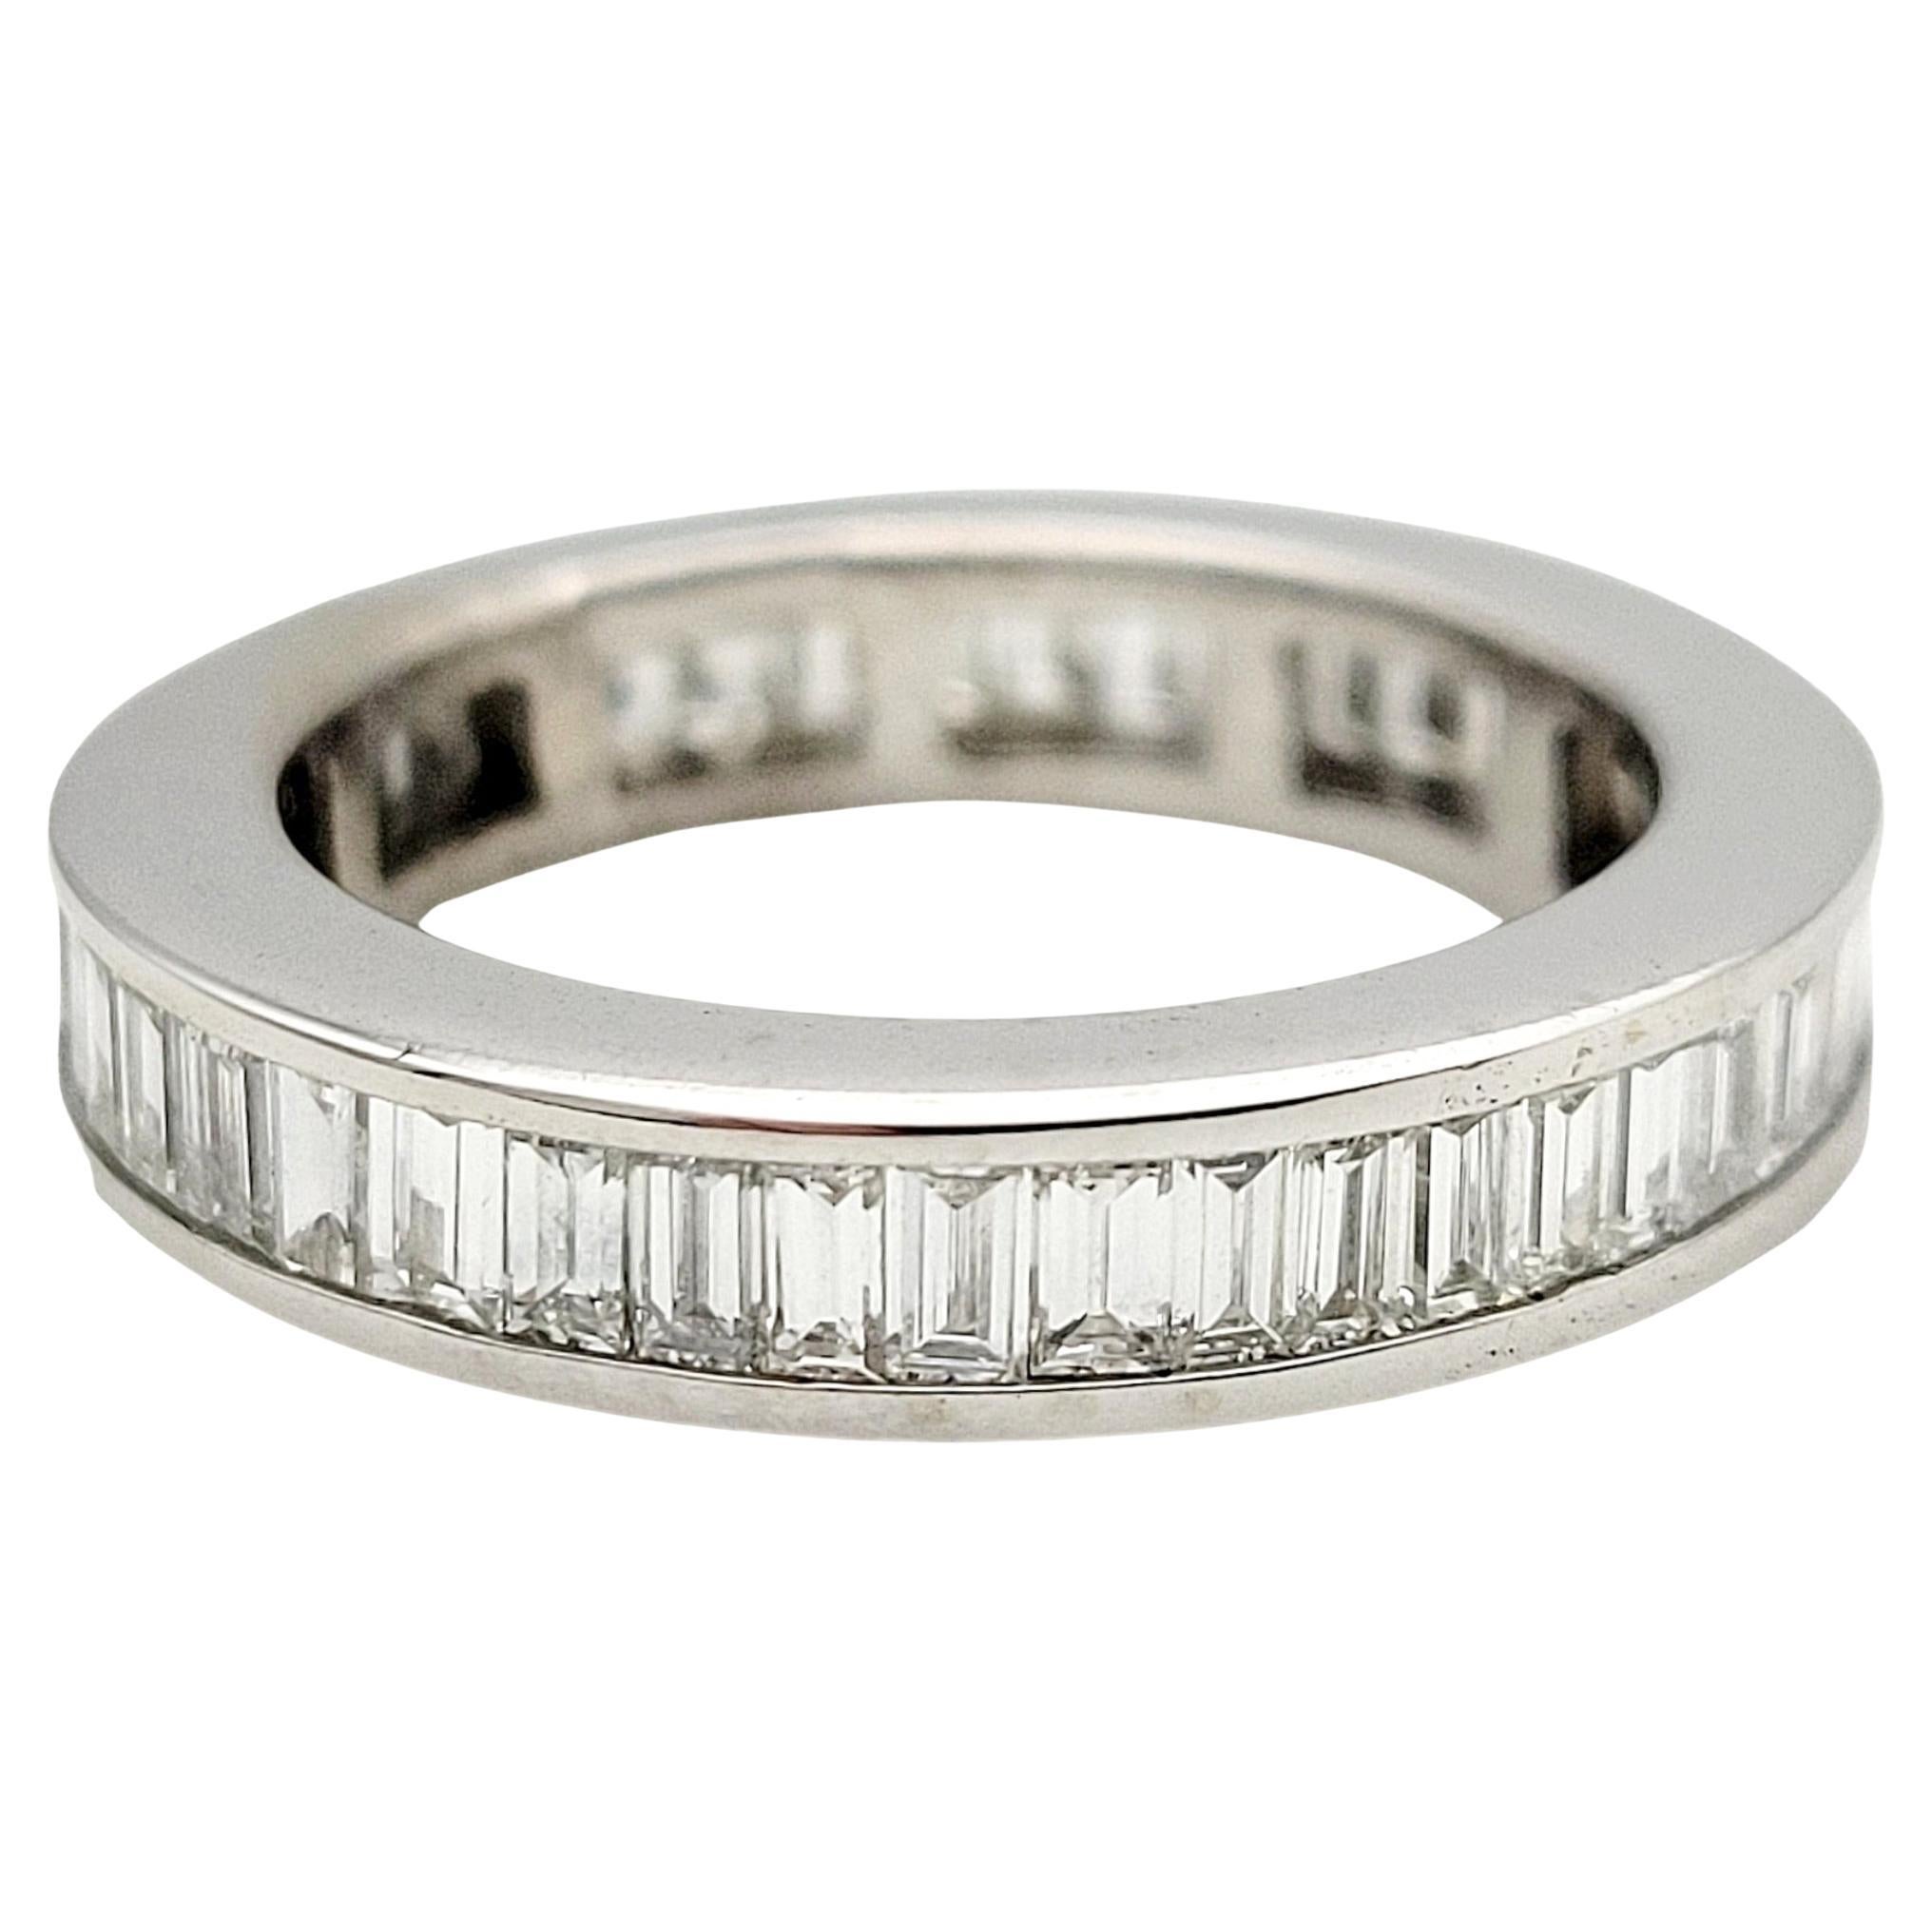 Ring size: 5

Introducing an exquisite channel set baguette diamond eternity band ring in luxurious 14 karat white gold. This timeless piece redefines elegance, offering a seamless row of meticulously arranged baguette-cut diamonds that encircle the